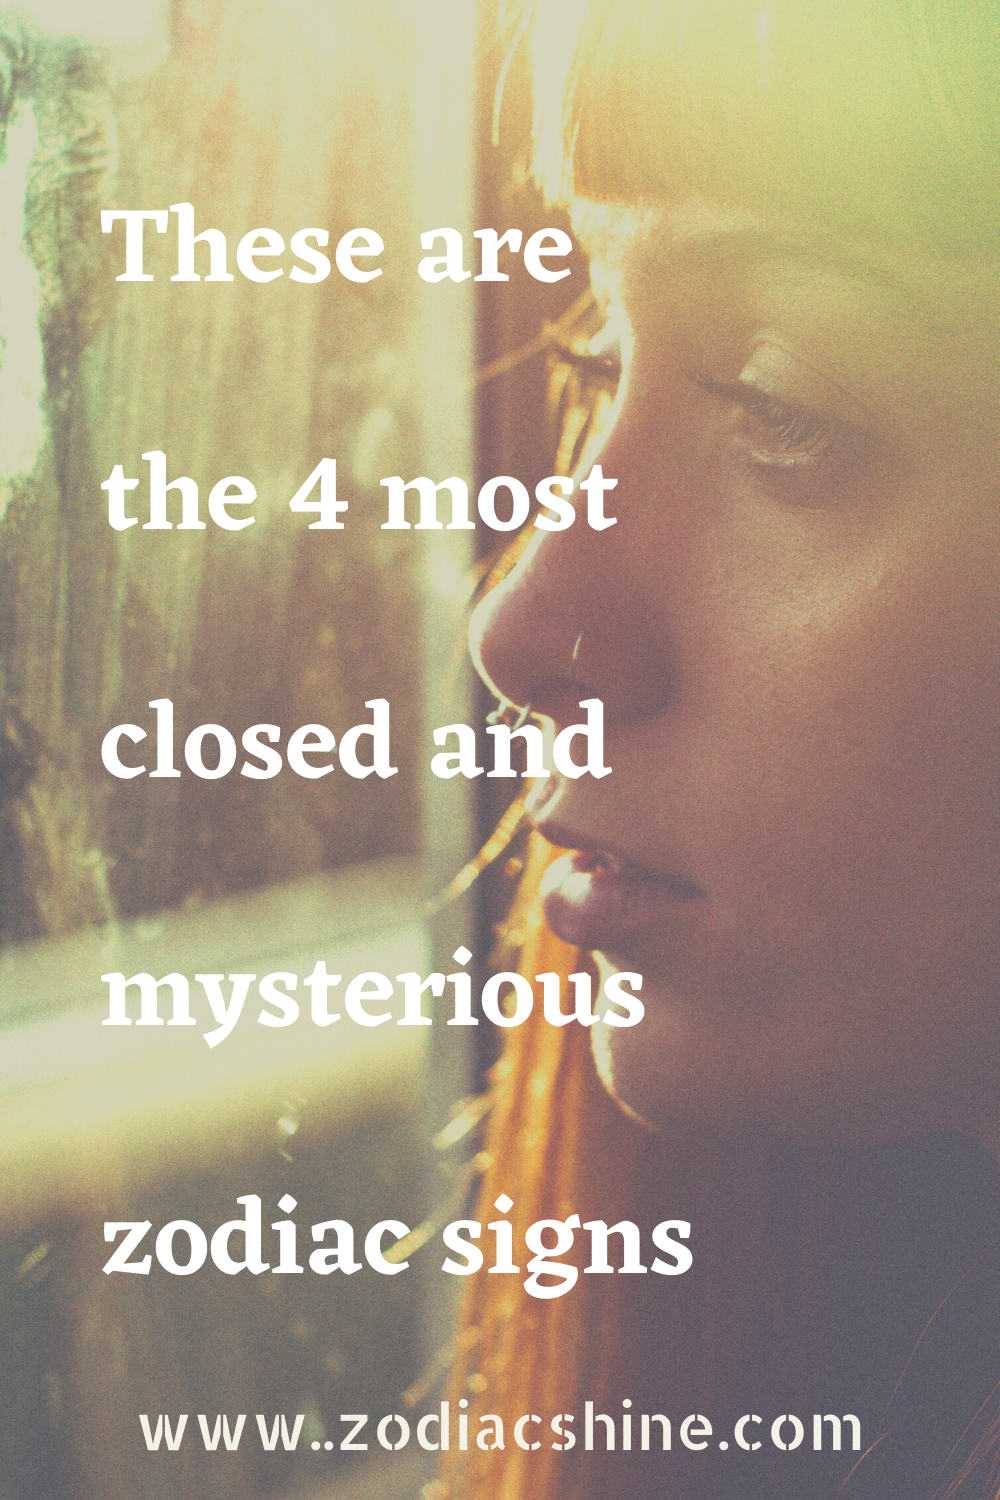 These are the 4 most closed and mysterious zodiac signs